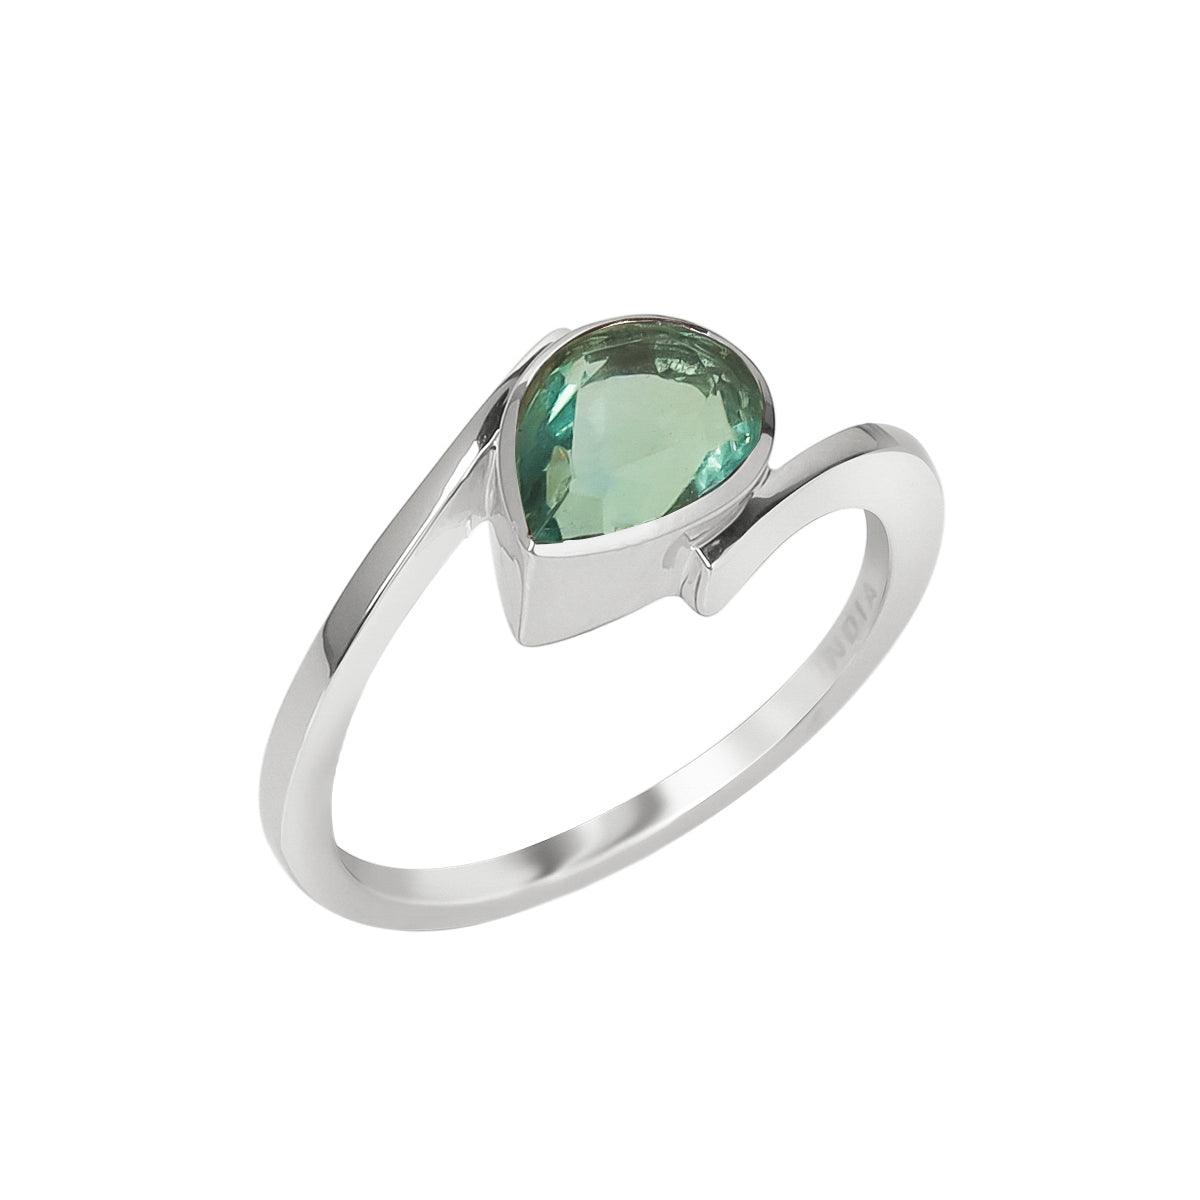 1.20 Ct. Green Fluorite 925 Sterling Silver Solitaire Ring Jewelry - YoTreasure